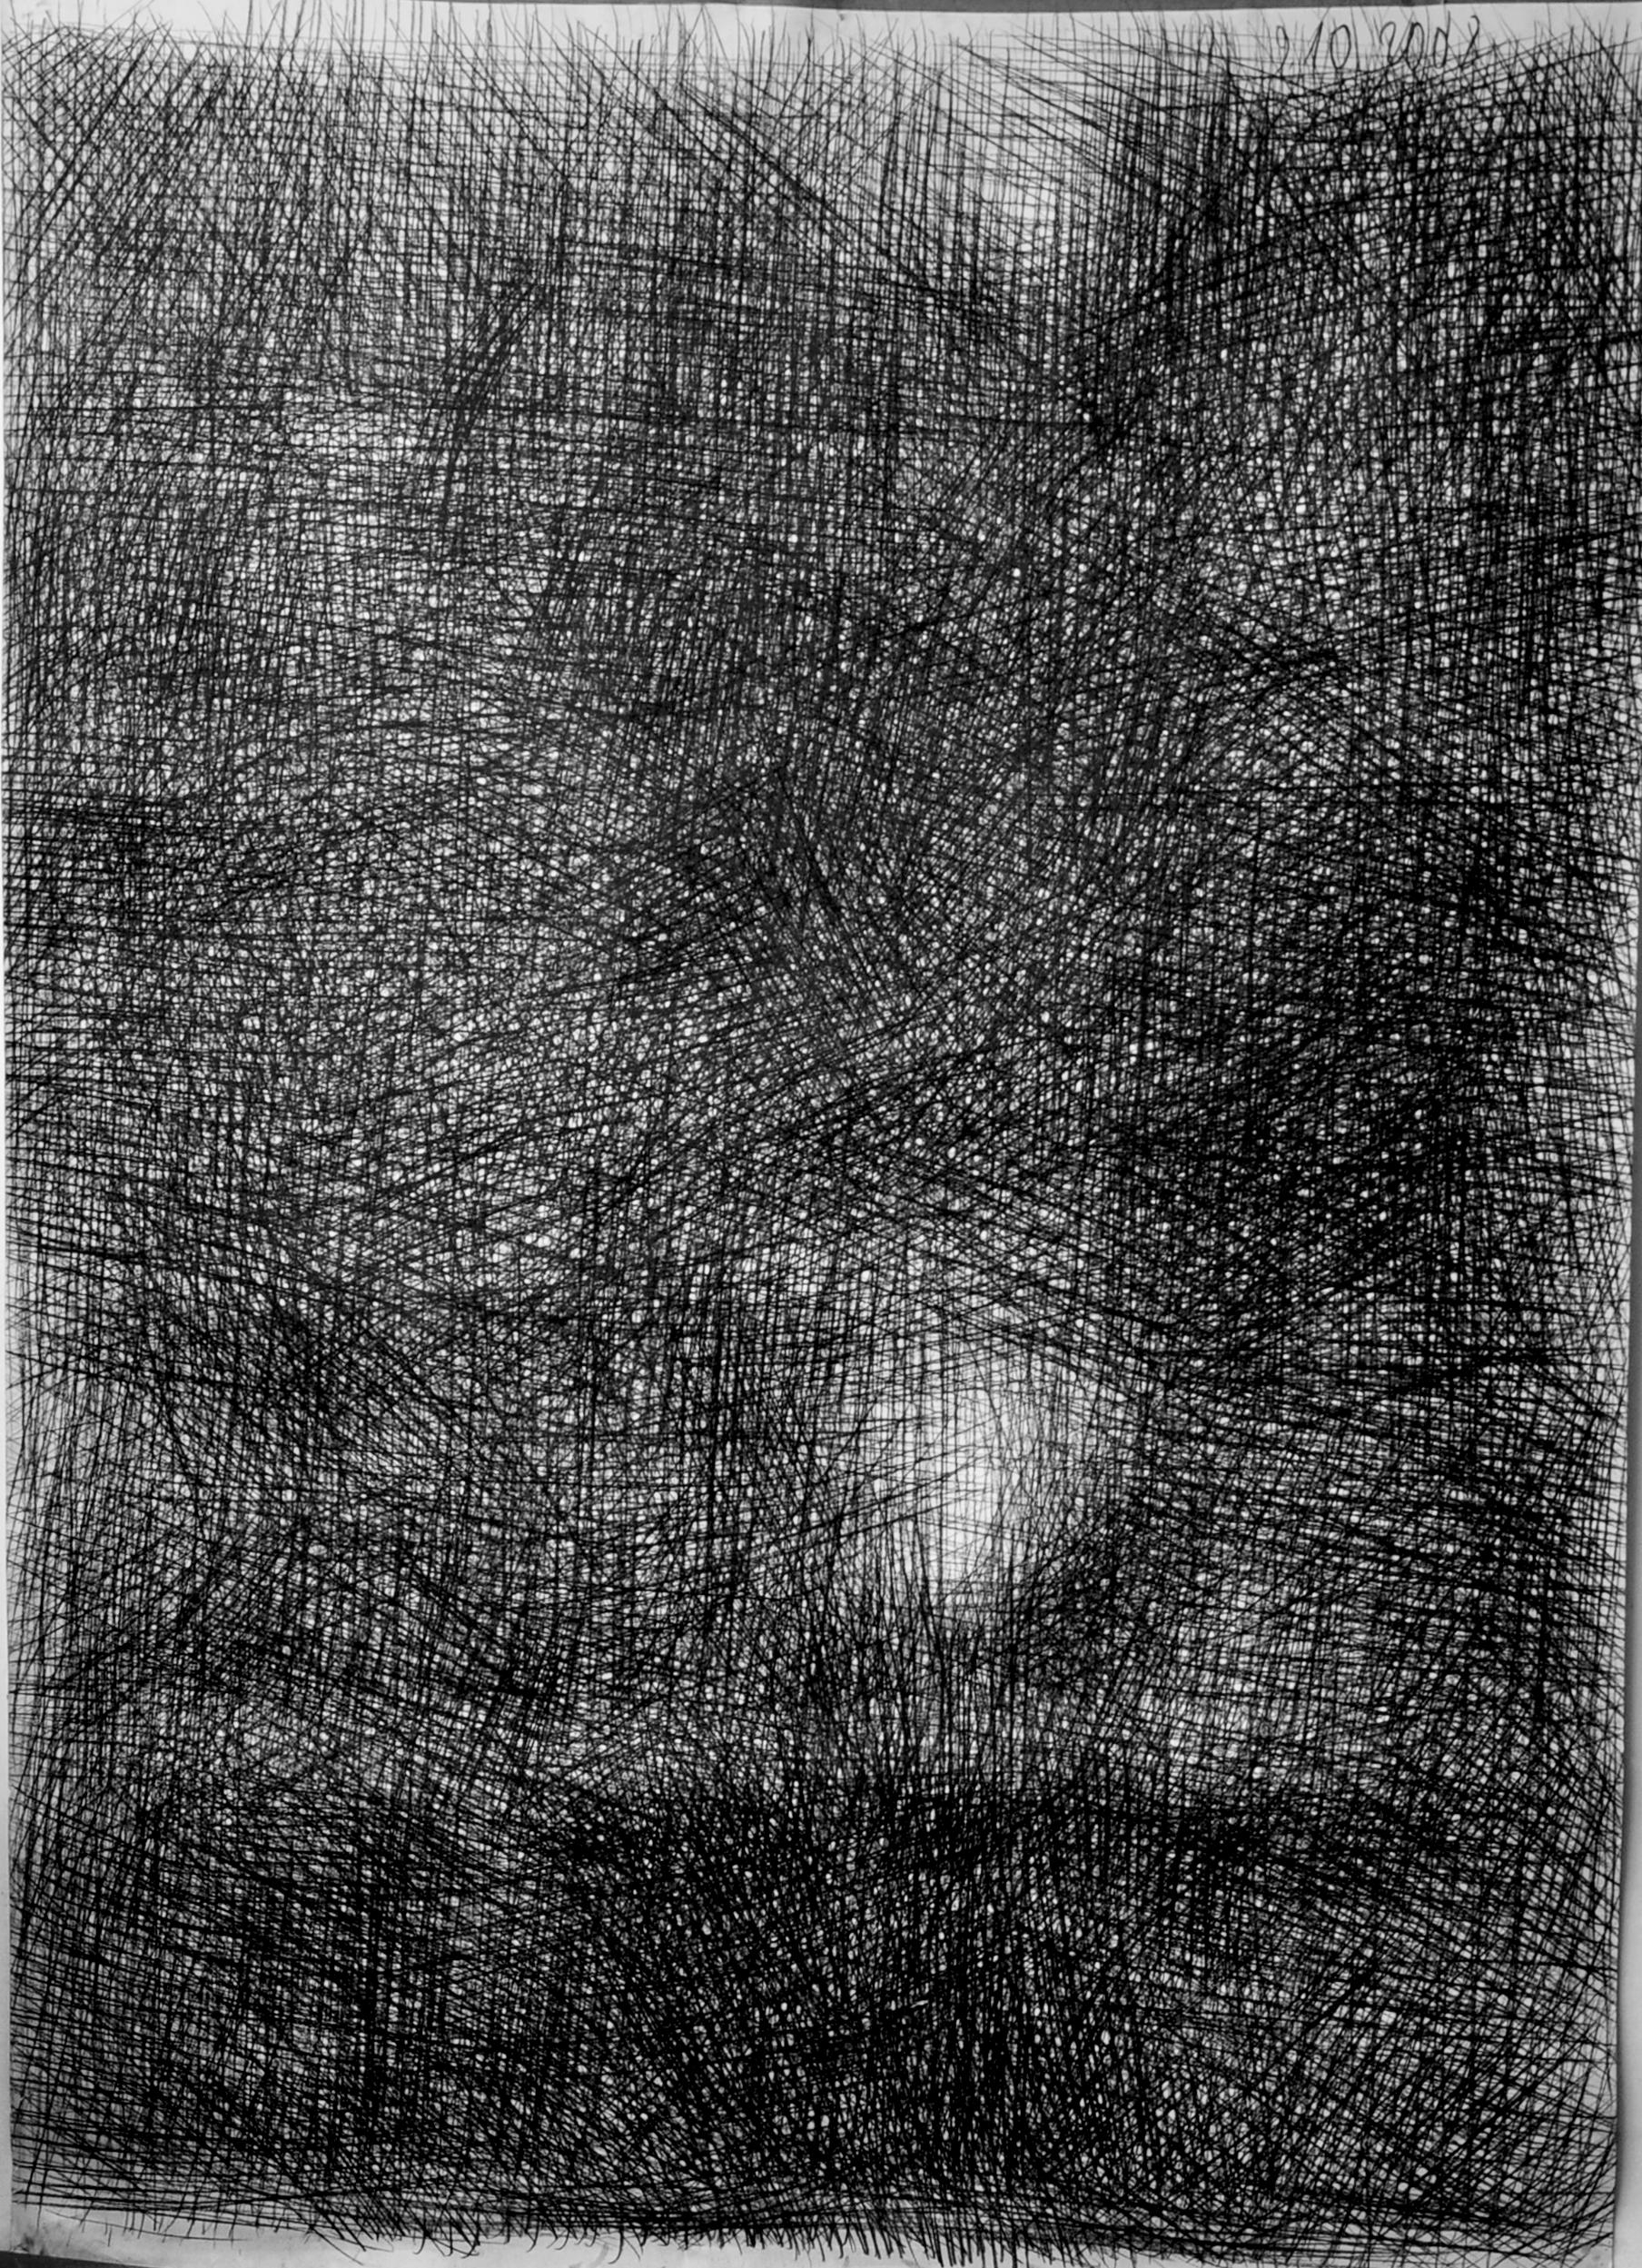 Light, Series Drawing From Israel - Large Format, Charcoal On Paper